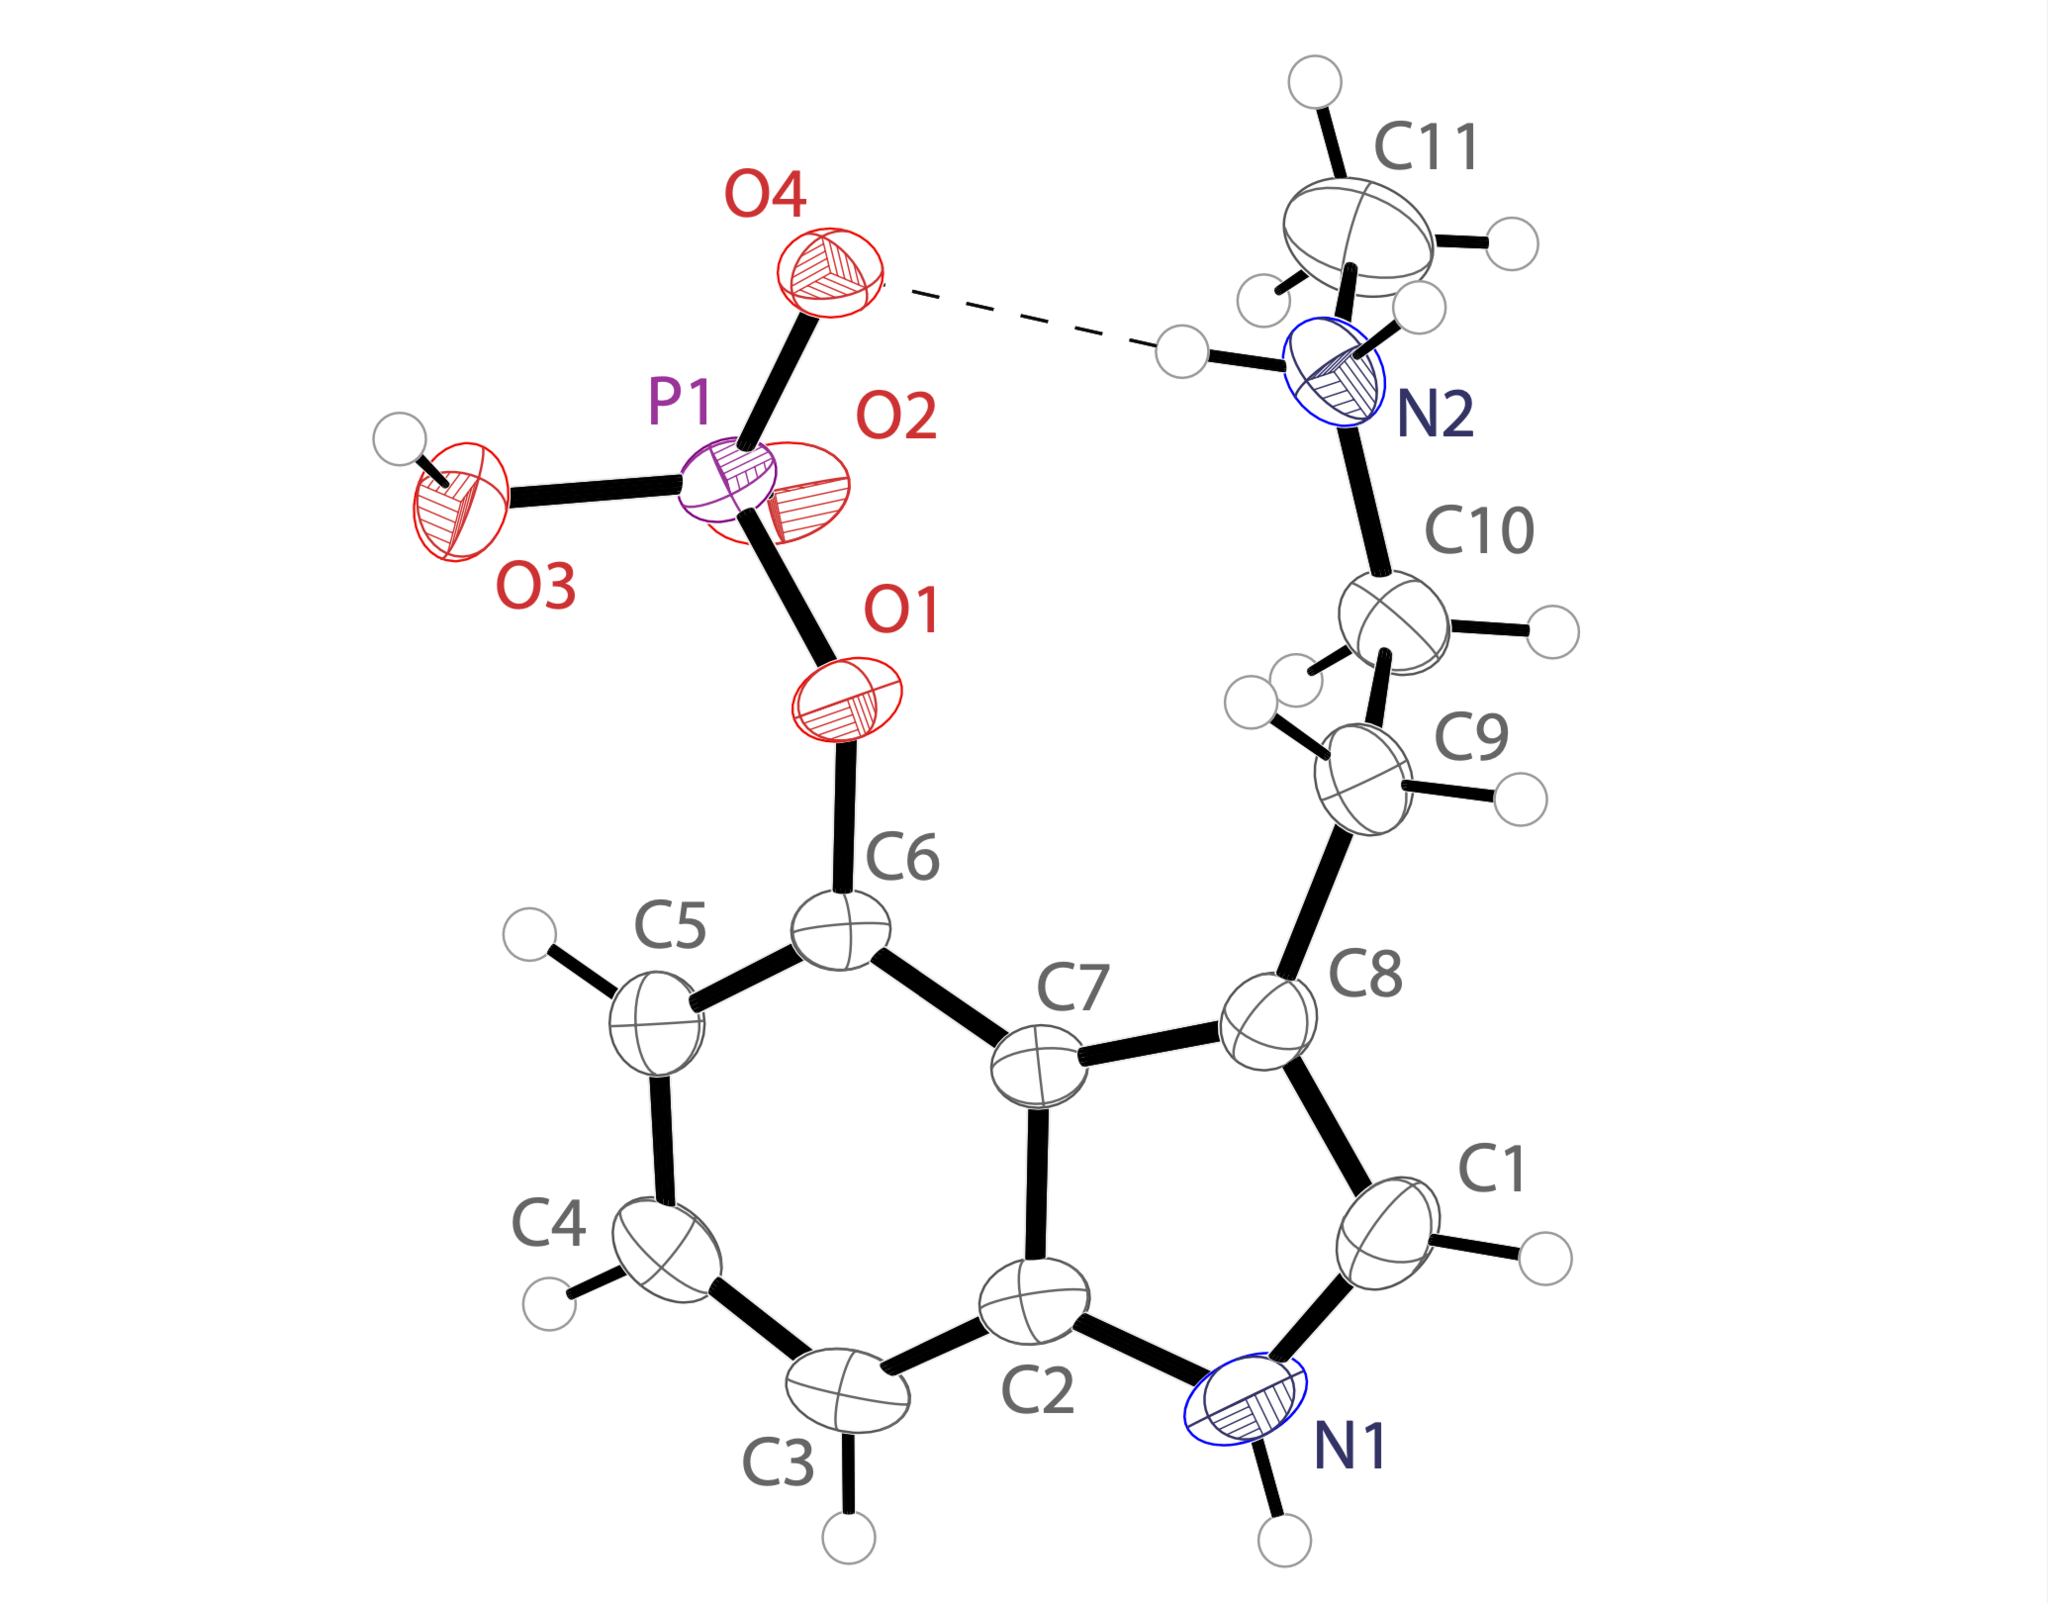 A ball and stick model of the chemical structure of baeocystin